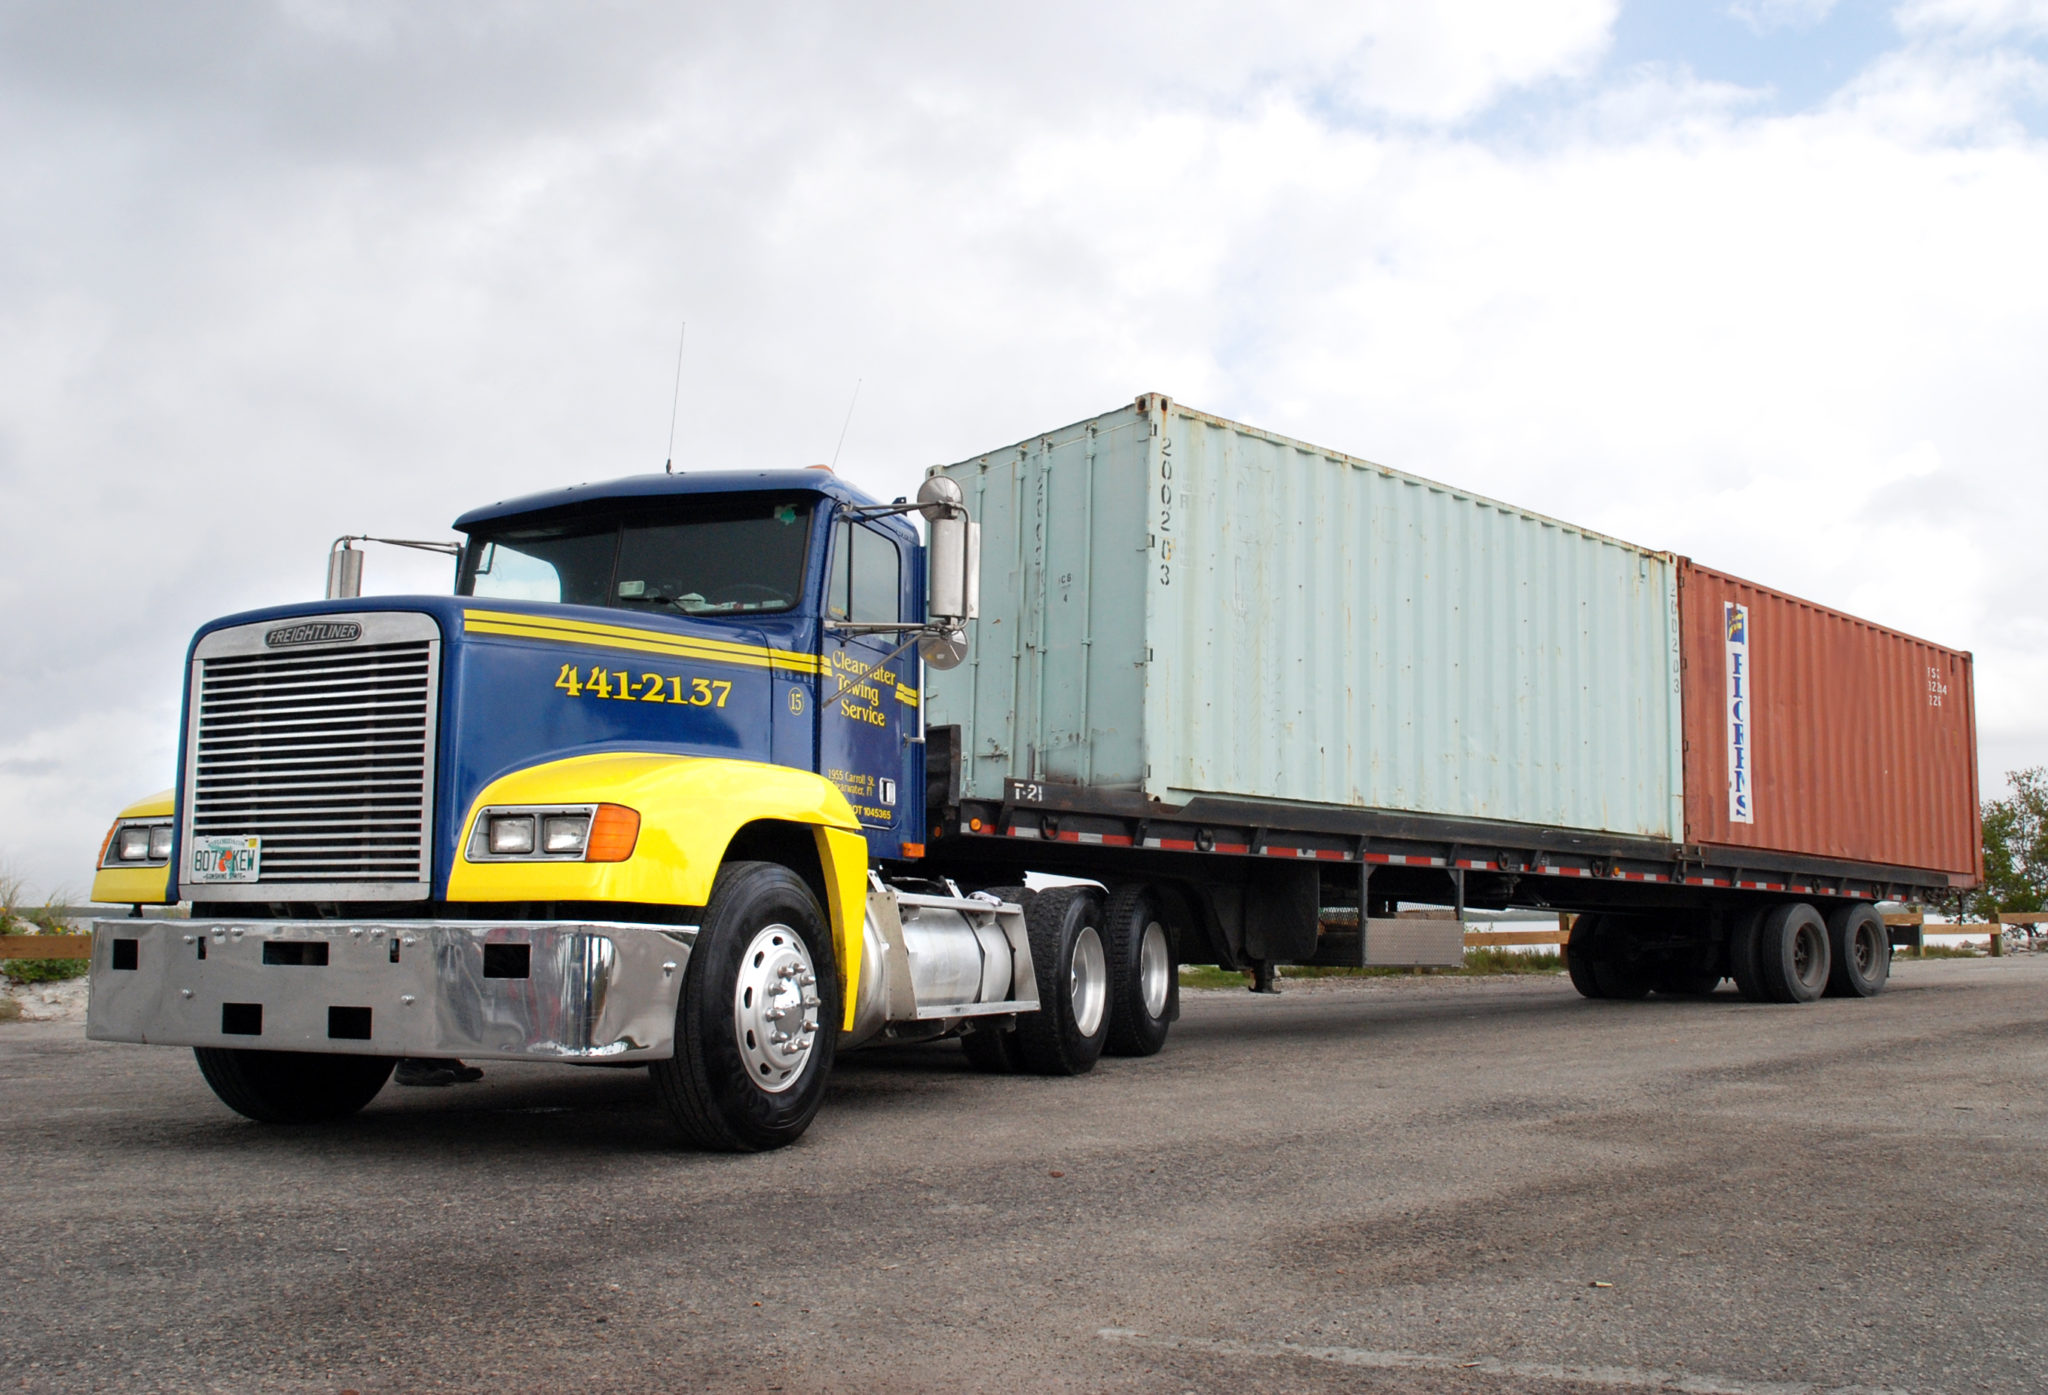 Landoll 330 Transporting 20 Foot Containers - Commercial Towing